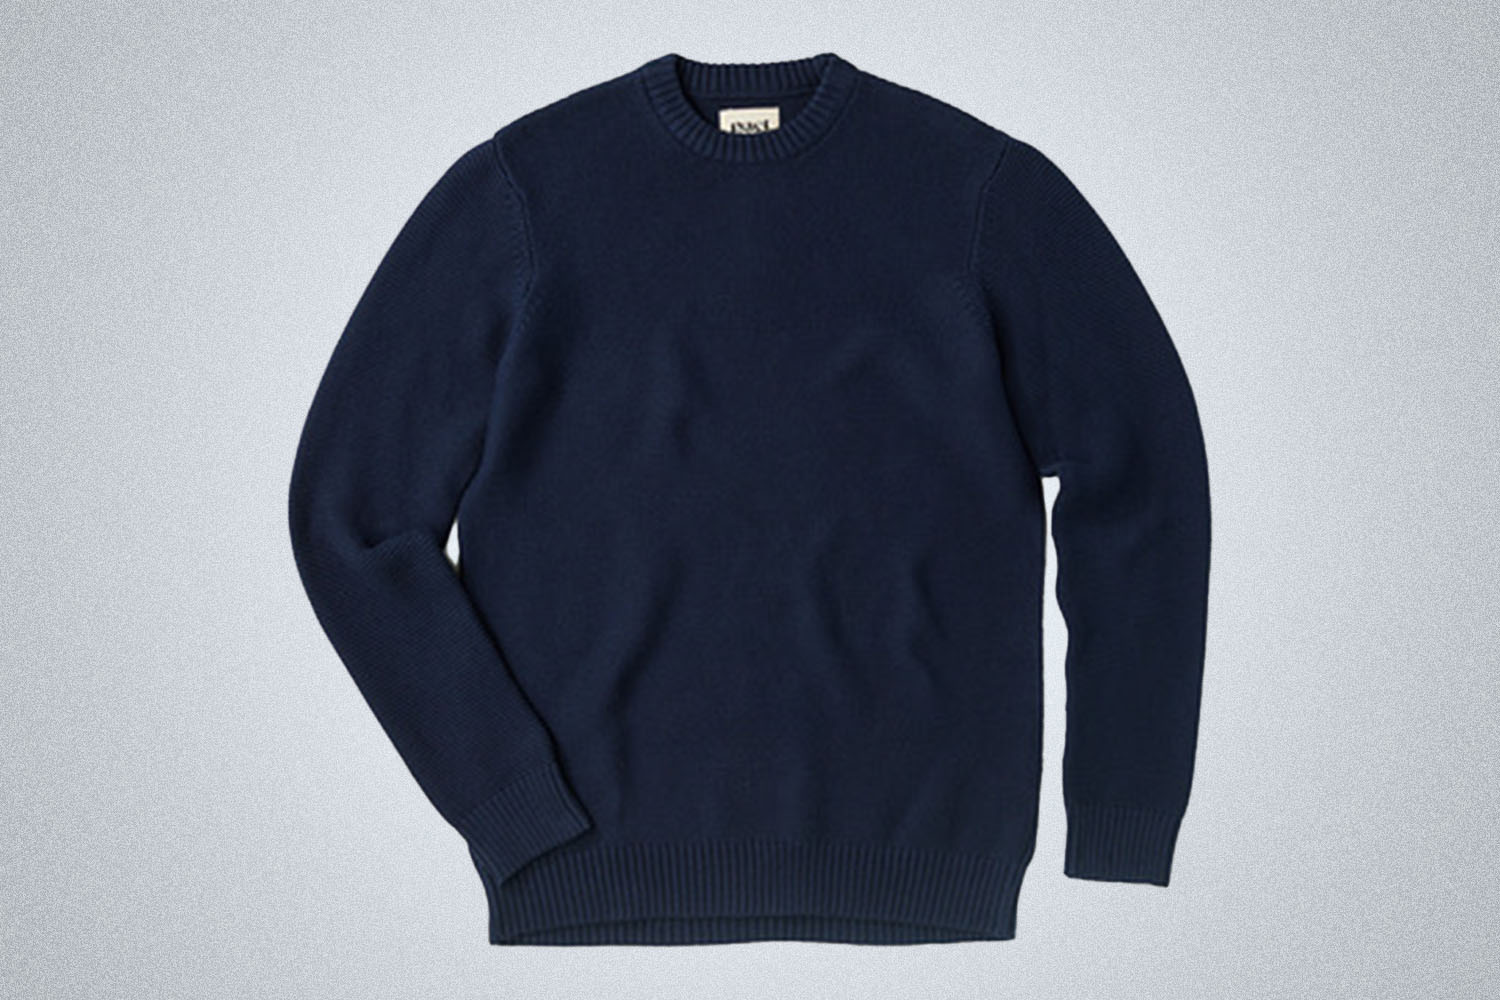 Ditch the Tux and Try the Bold New Year's Eve Sweater Instead